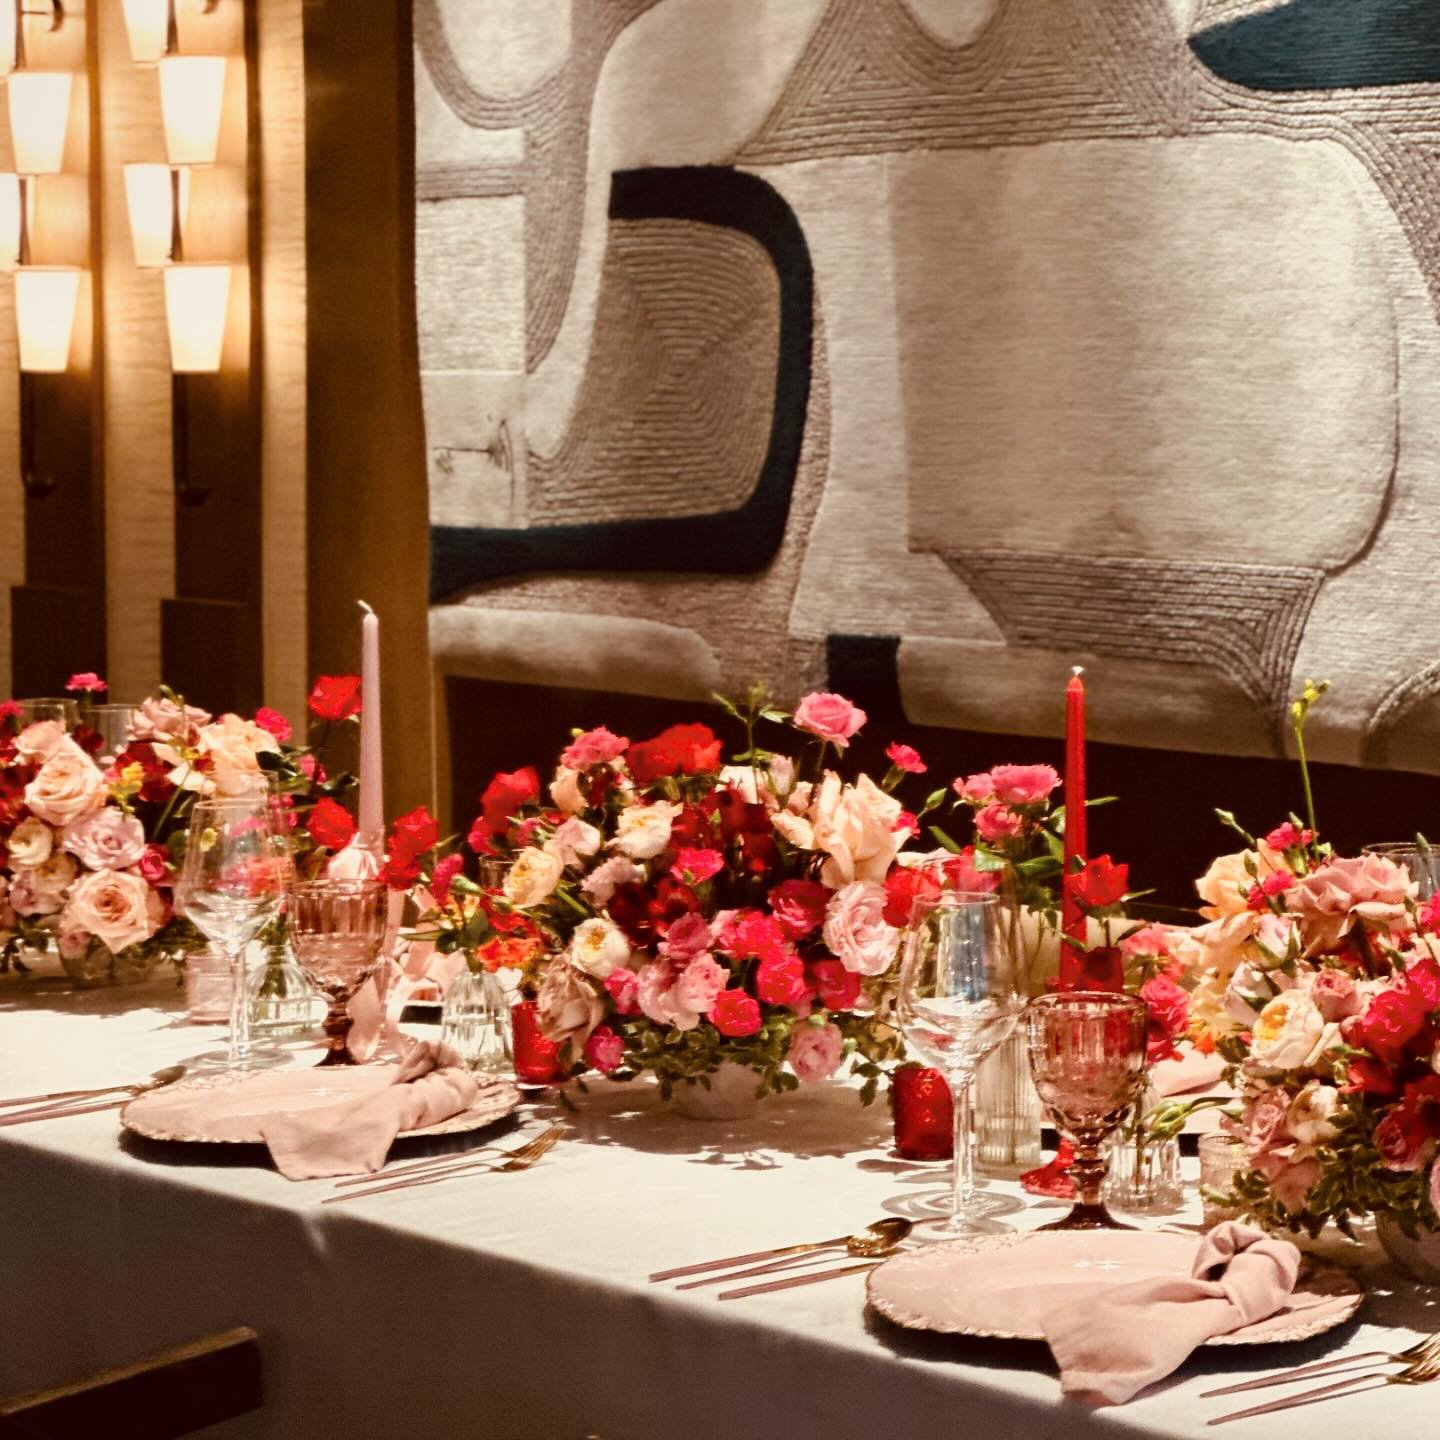 A blend of pink and red hues, a lush runner of florals and an array of delicate pink and white candles - it&rsquo;s elegant and captivating. 

Elevate your next celebration with  our sophisticated setting, whether it&rsquo;s a private gathering, wedd